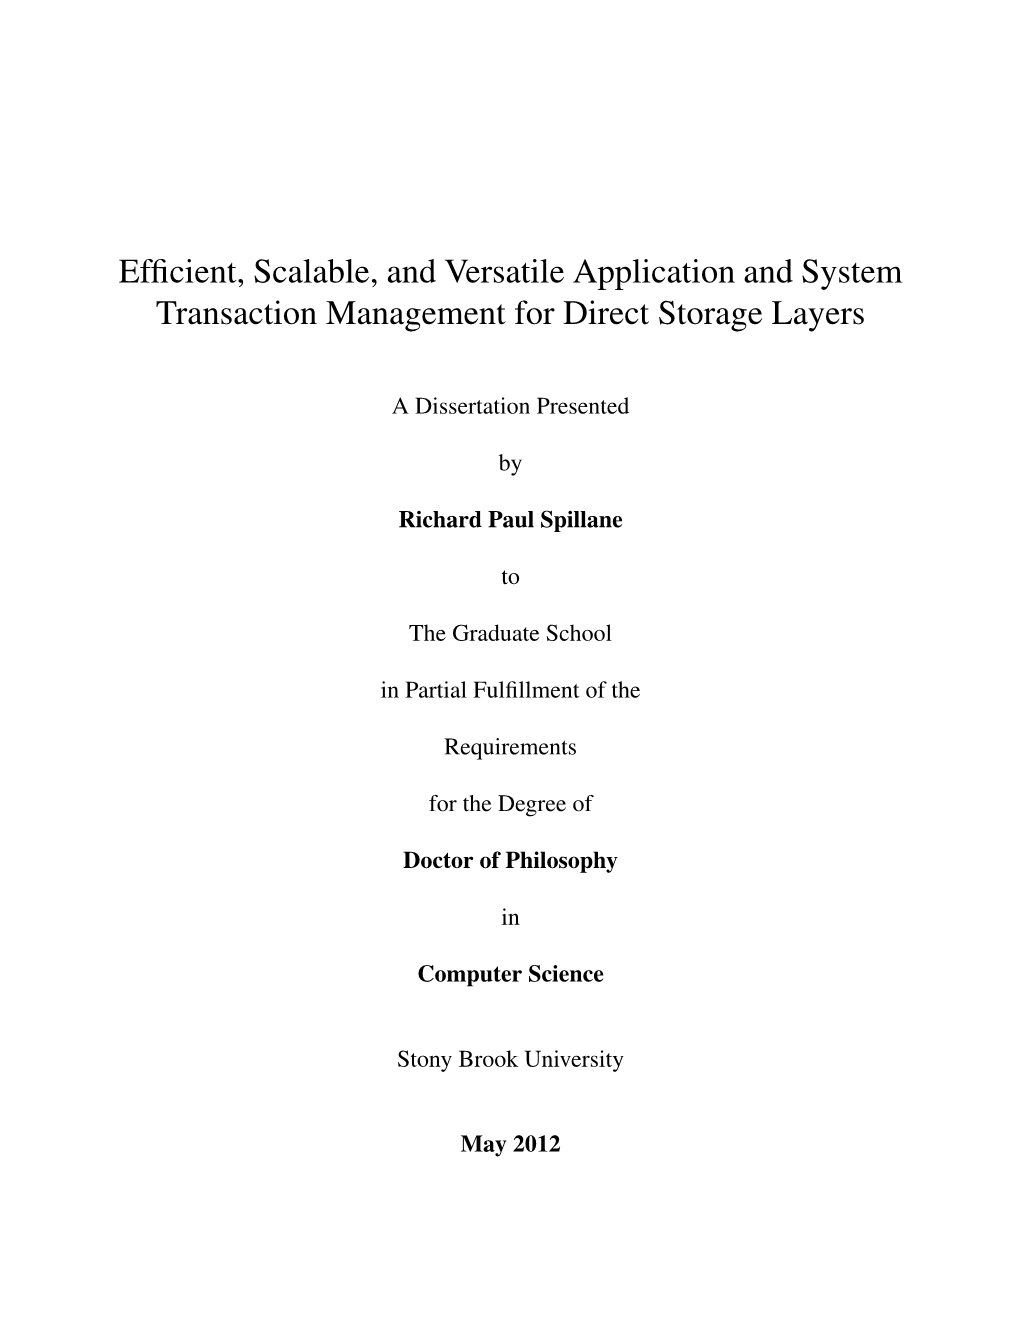 Efficient, Scalable, and Versatile Application and System Transaction